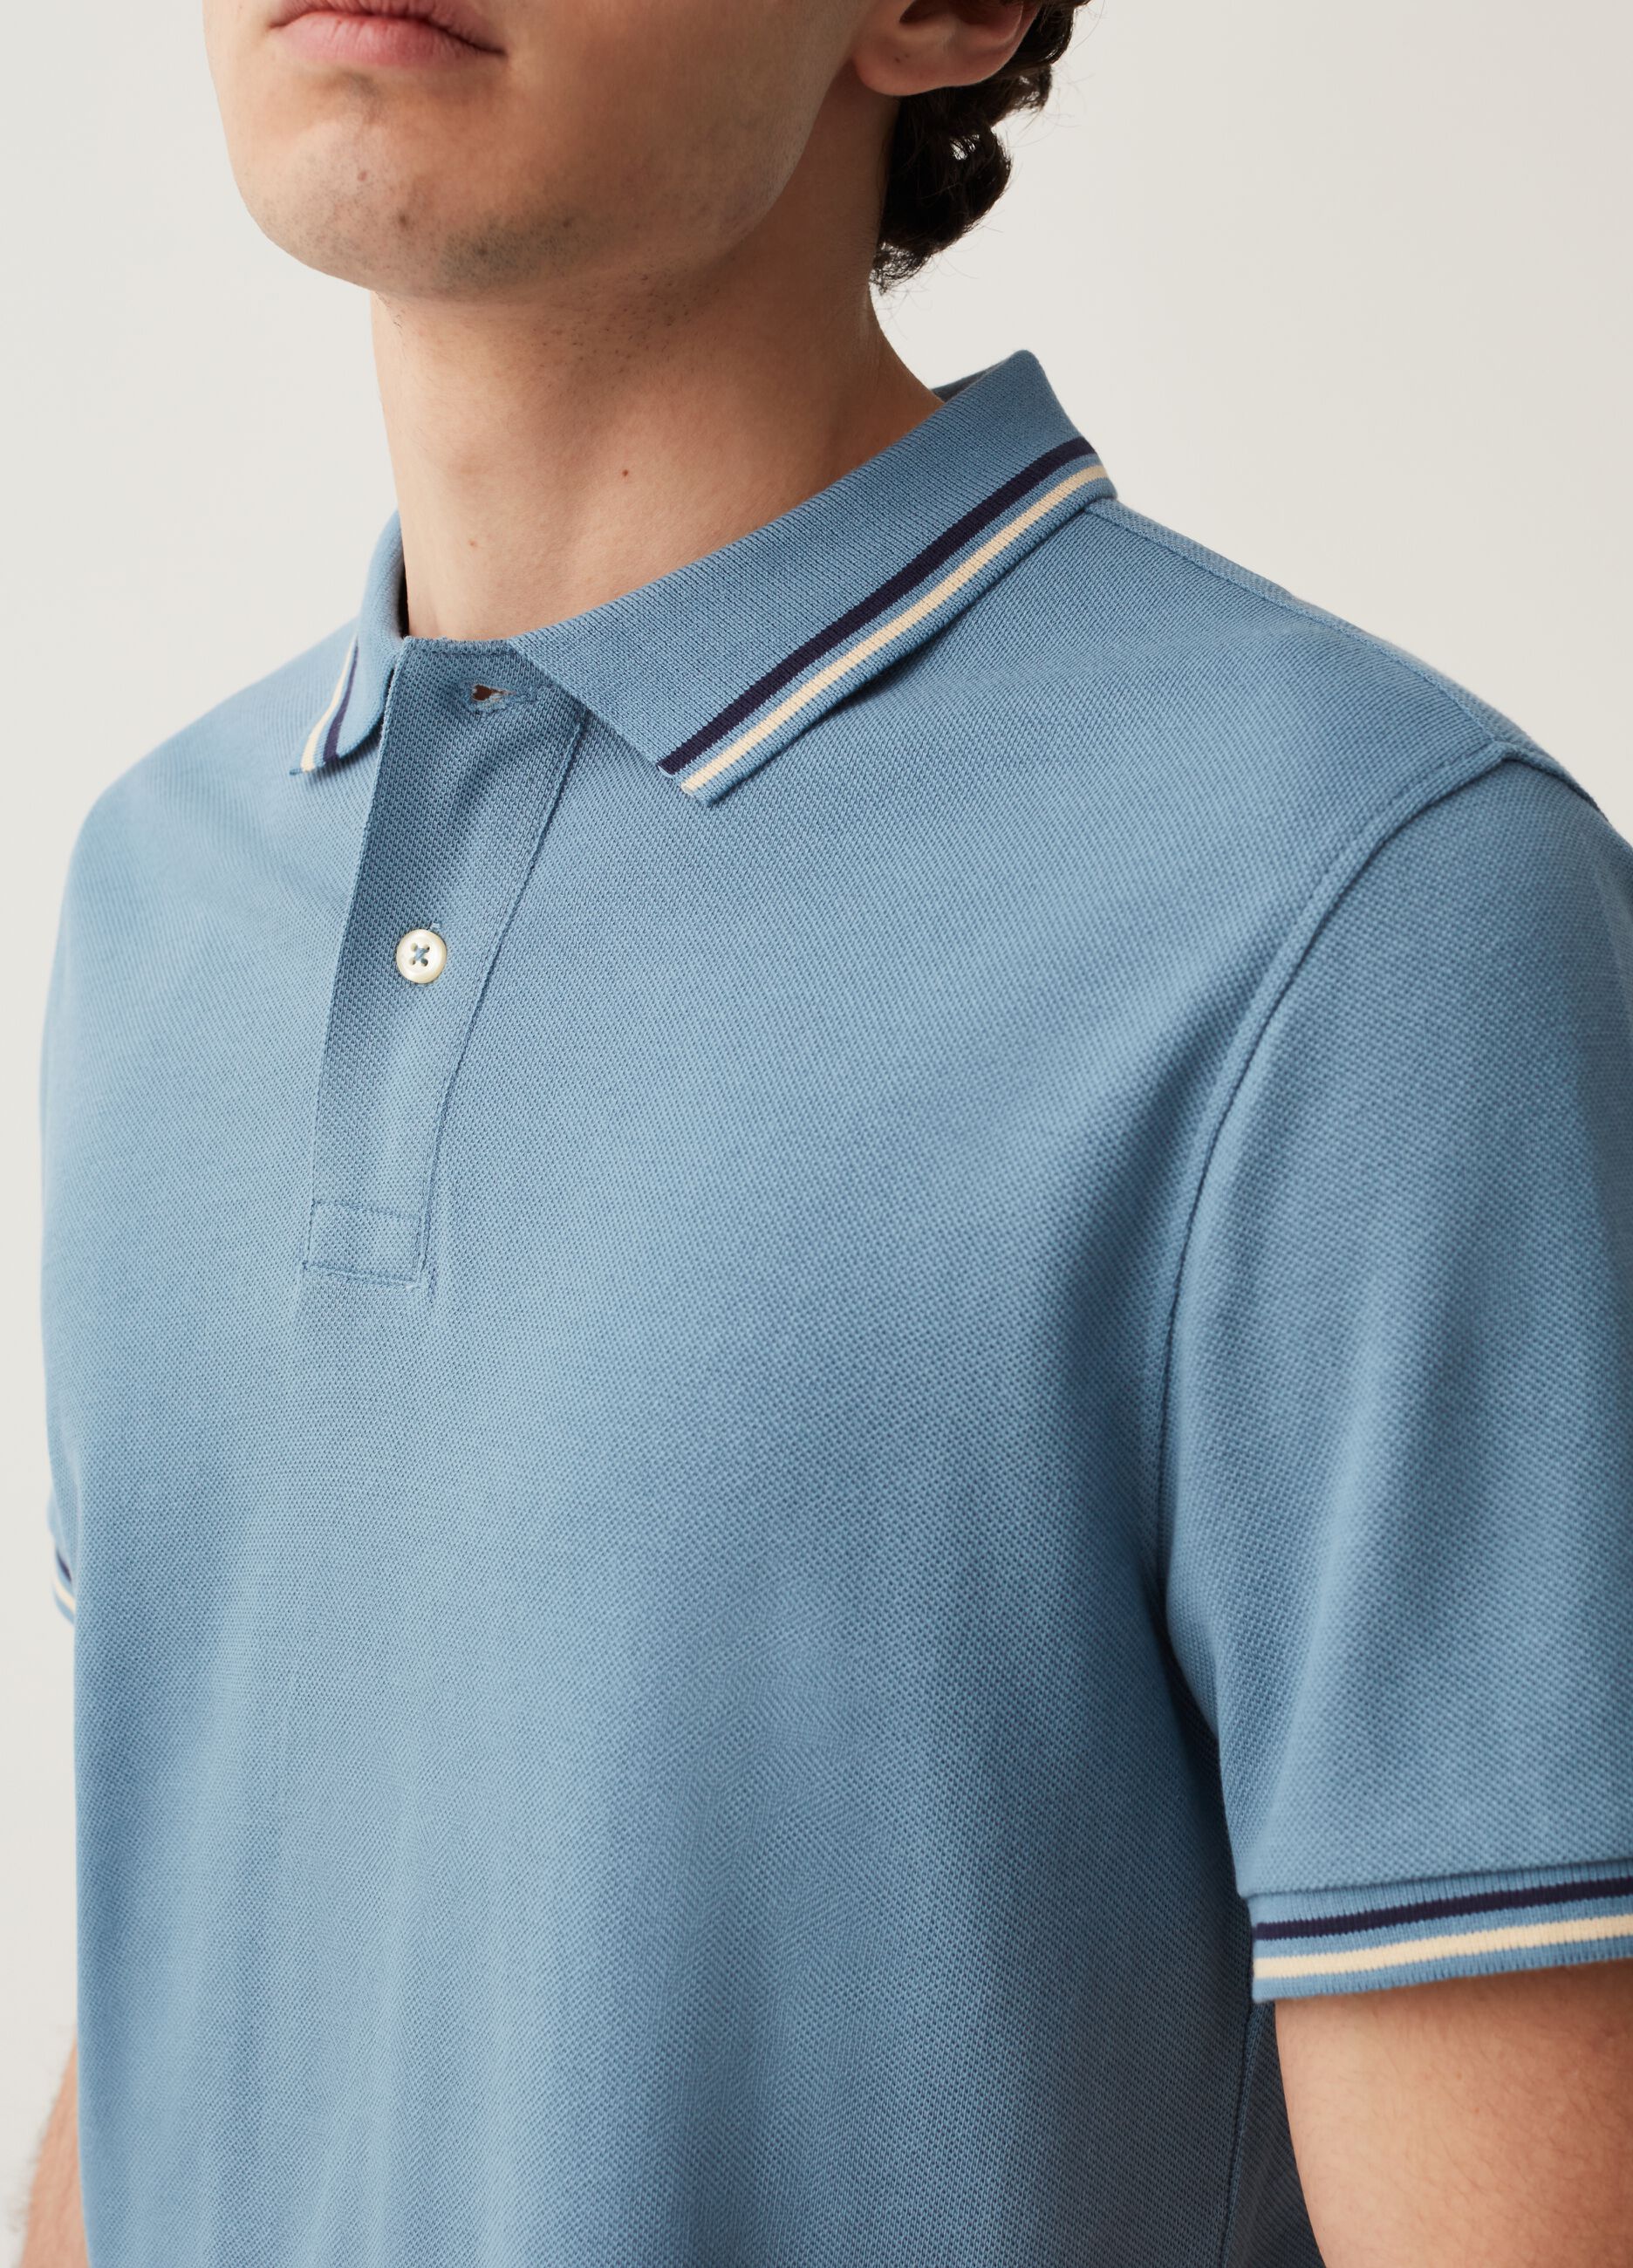 Grand&Hills polo shirt in pique with striped trim